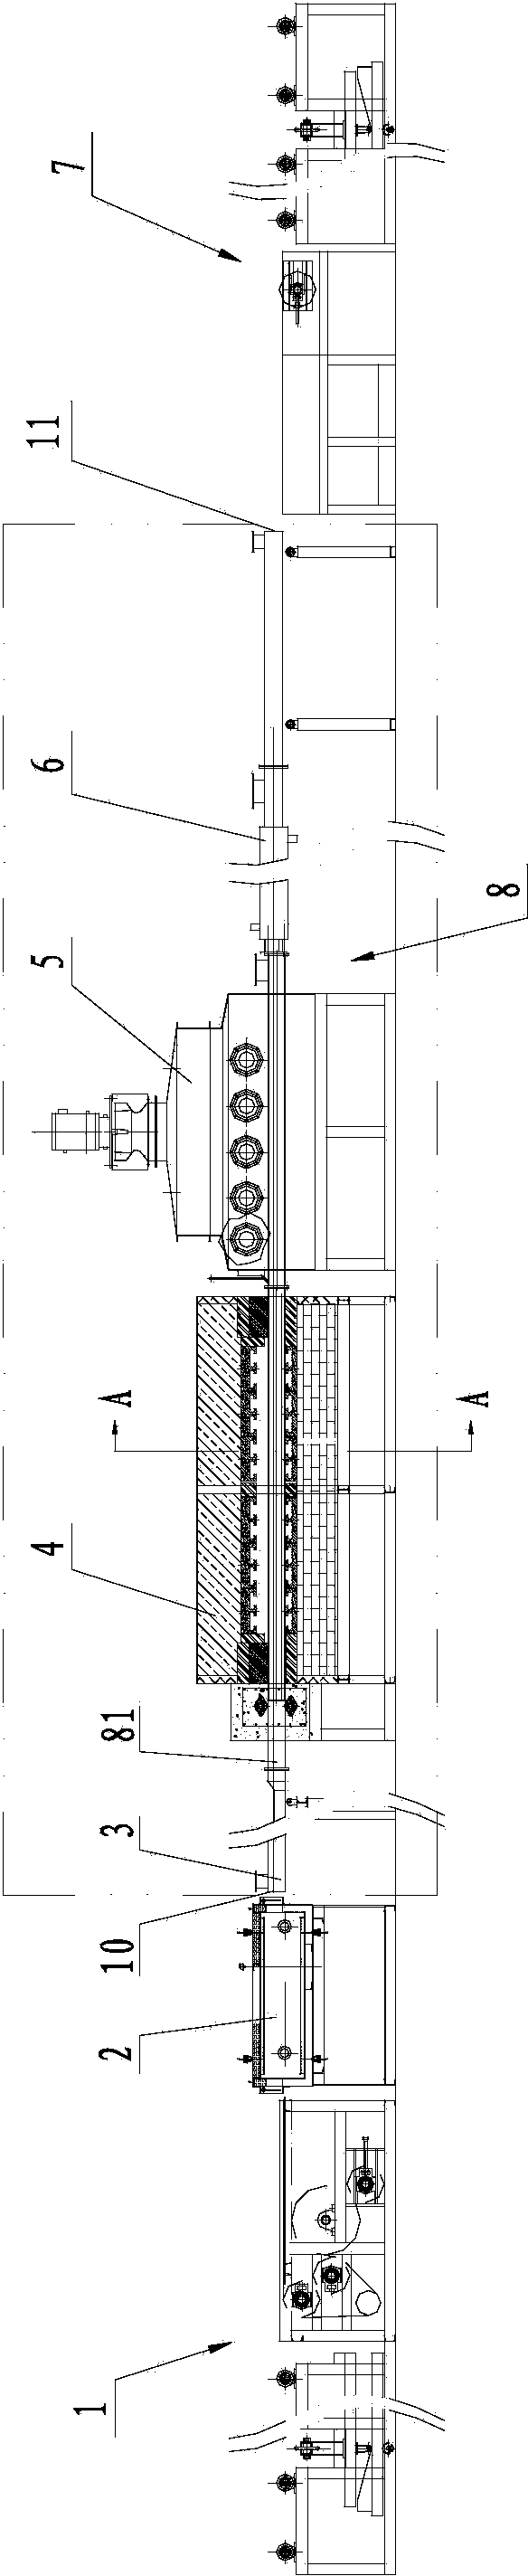 Tubular thermal treatment furnace capable of continuously conveying materials